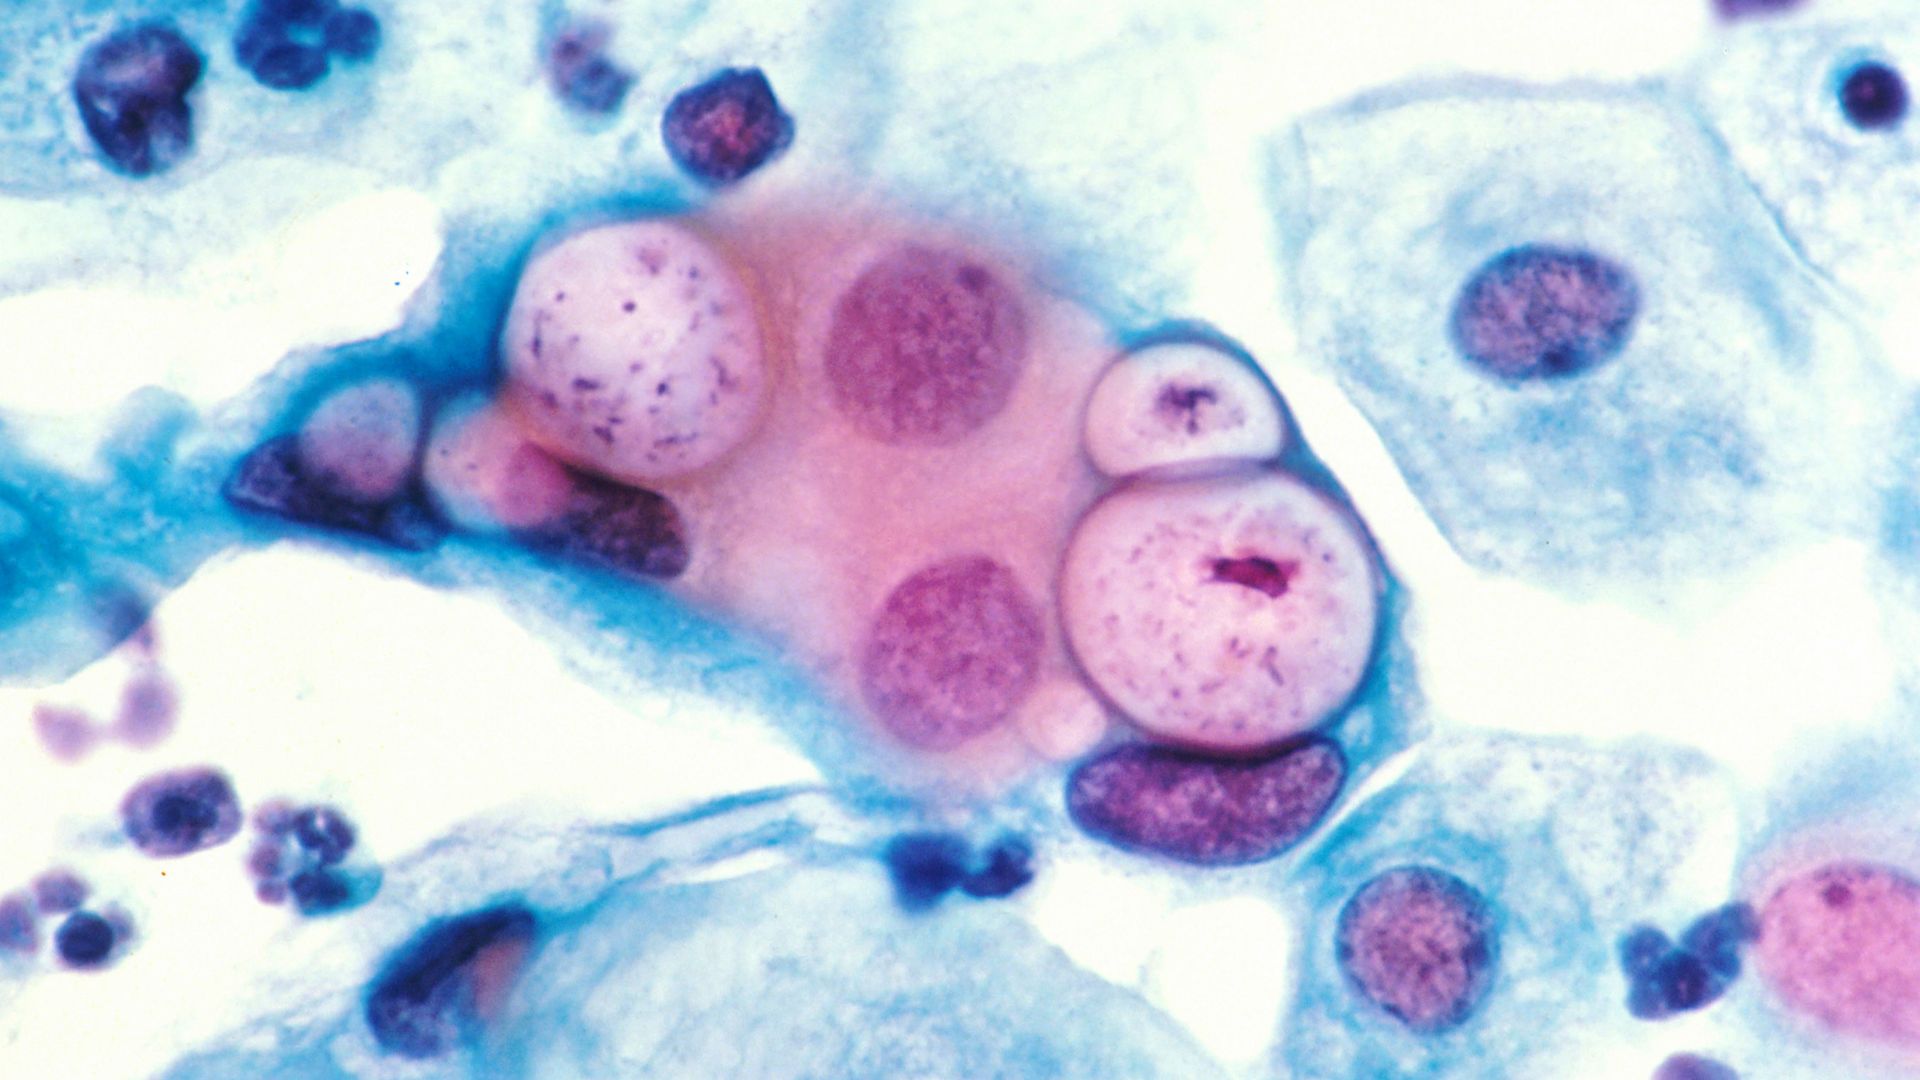 Human pap smear showing chlamydia in the vacuoles at 500x and stained with H&E. (Photo by: Media for Medical/UIG via Getty Images)